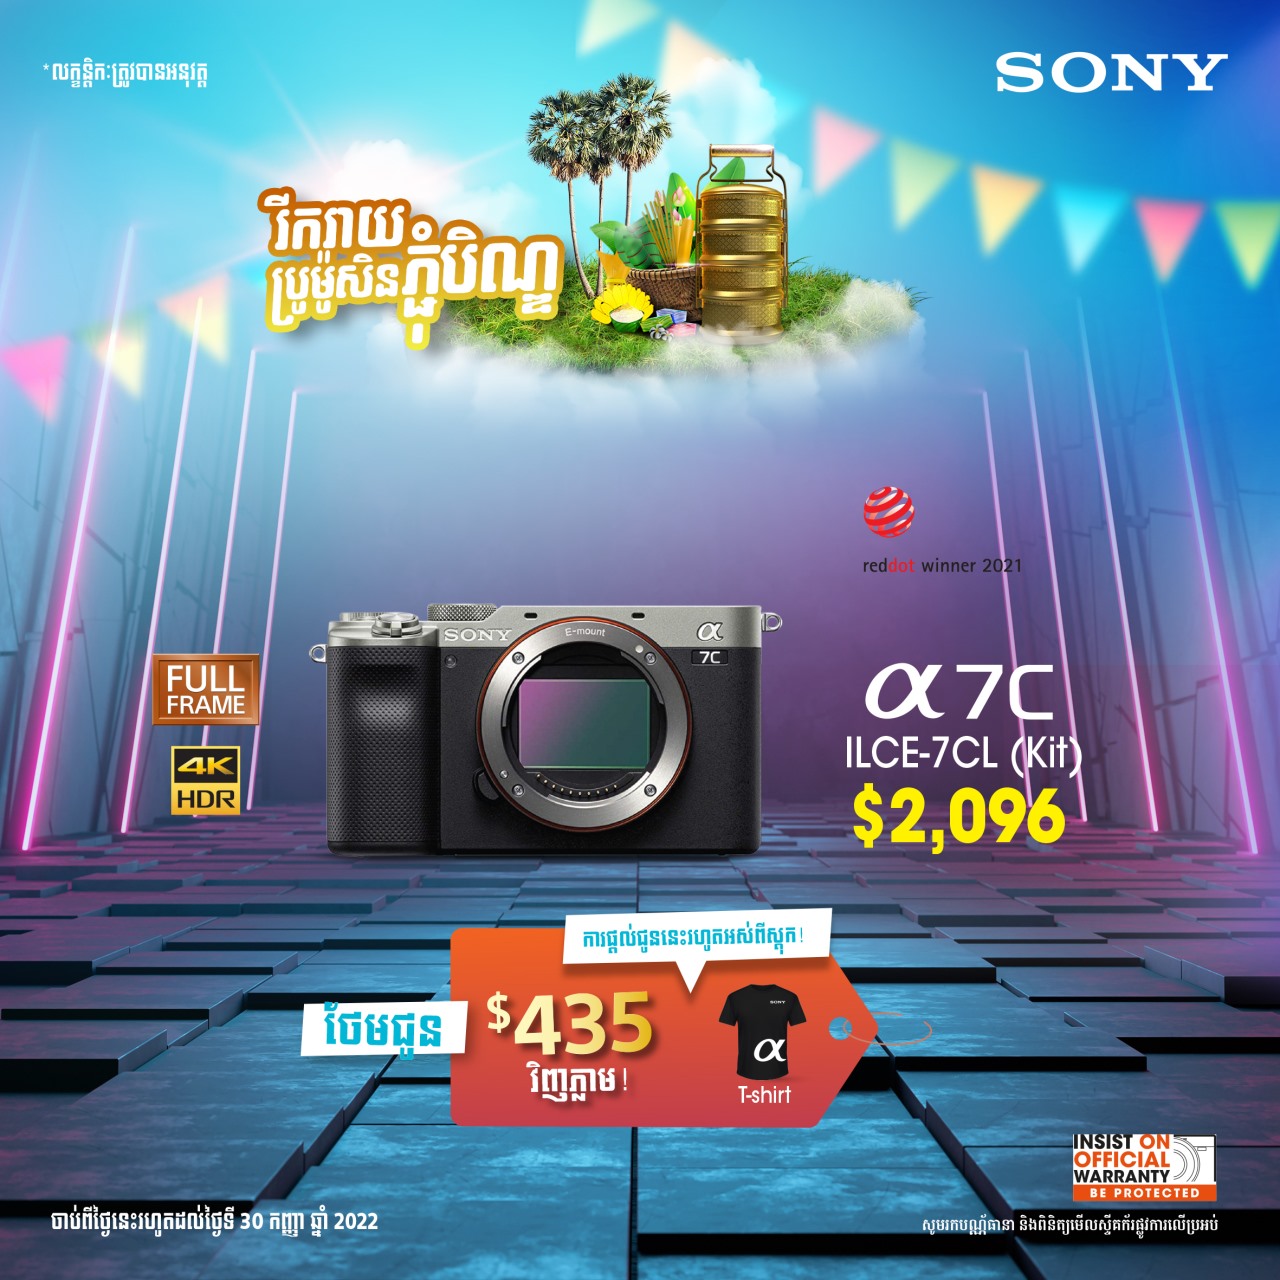 Promotion Phchum Ben for Sony Camera and Lenses 01/09/2022-30/09/2022